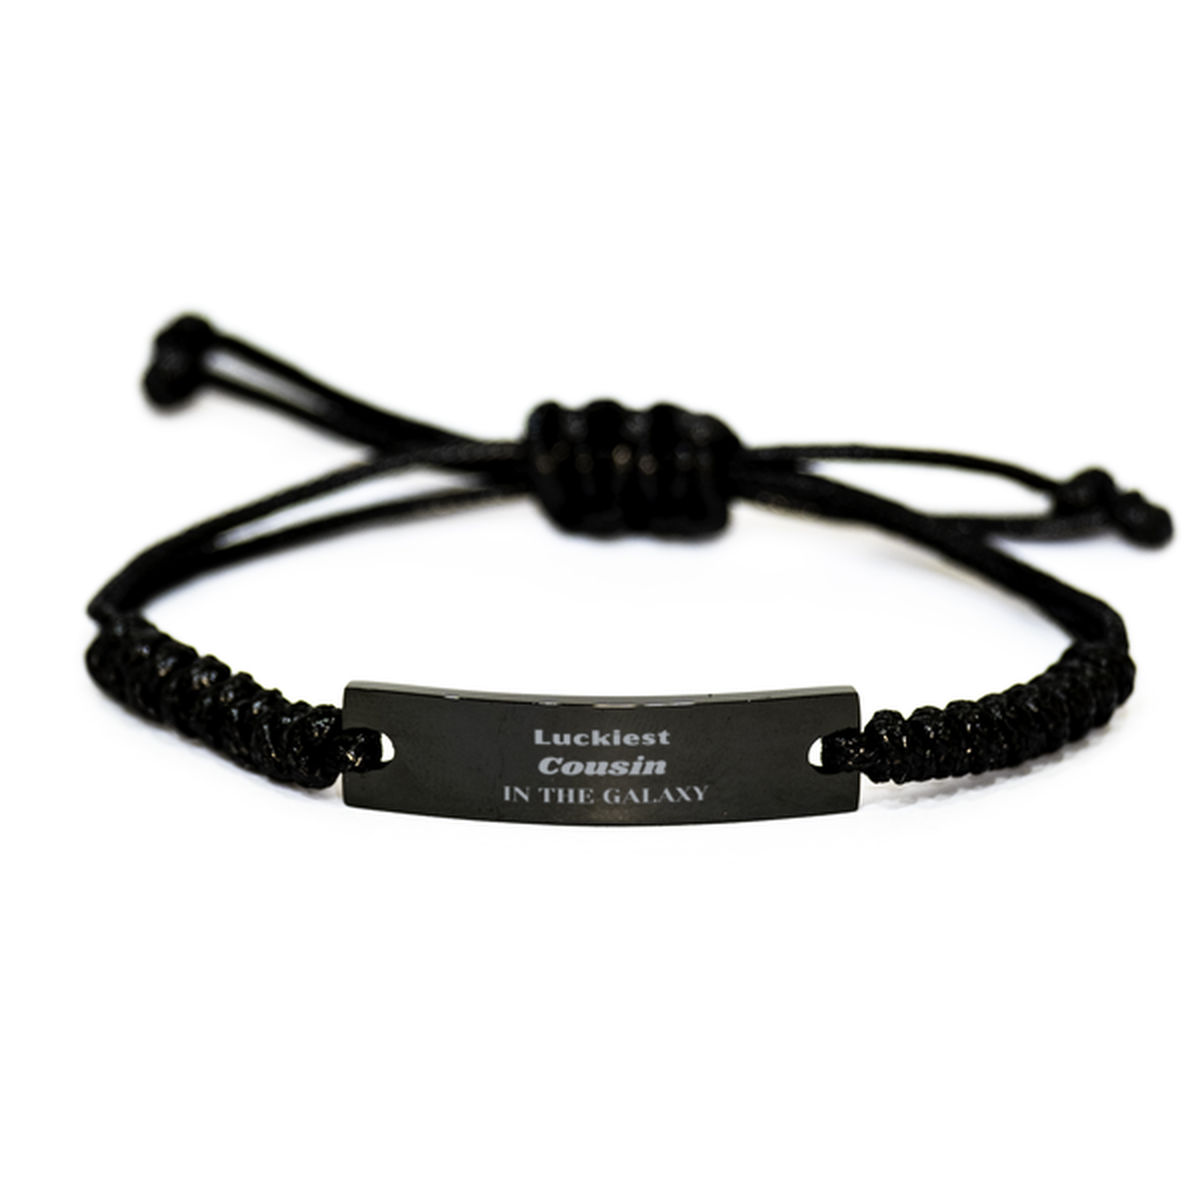 Luckiest Cousin in the Galaxy, To My Cousin Engraved Gifts, Christmas Cousin Black Rope Bracelet Gifts, X-mas Birthday Unique Gifts For Cousin Men Women